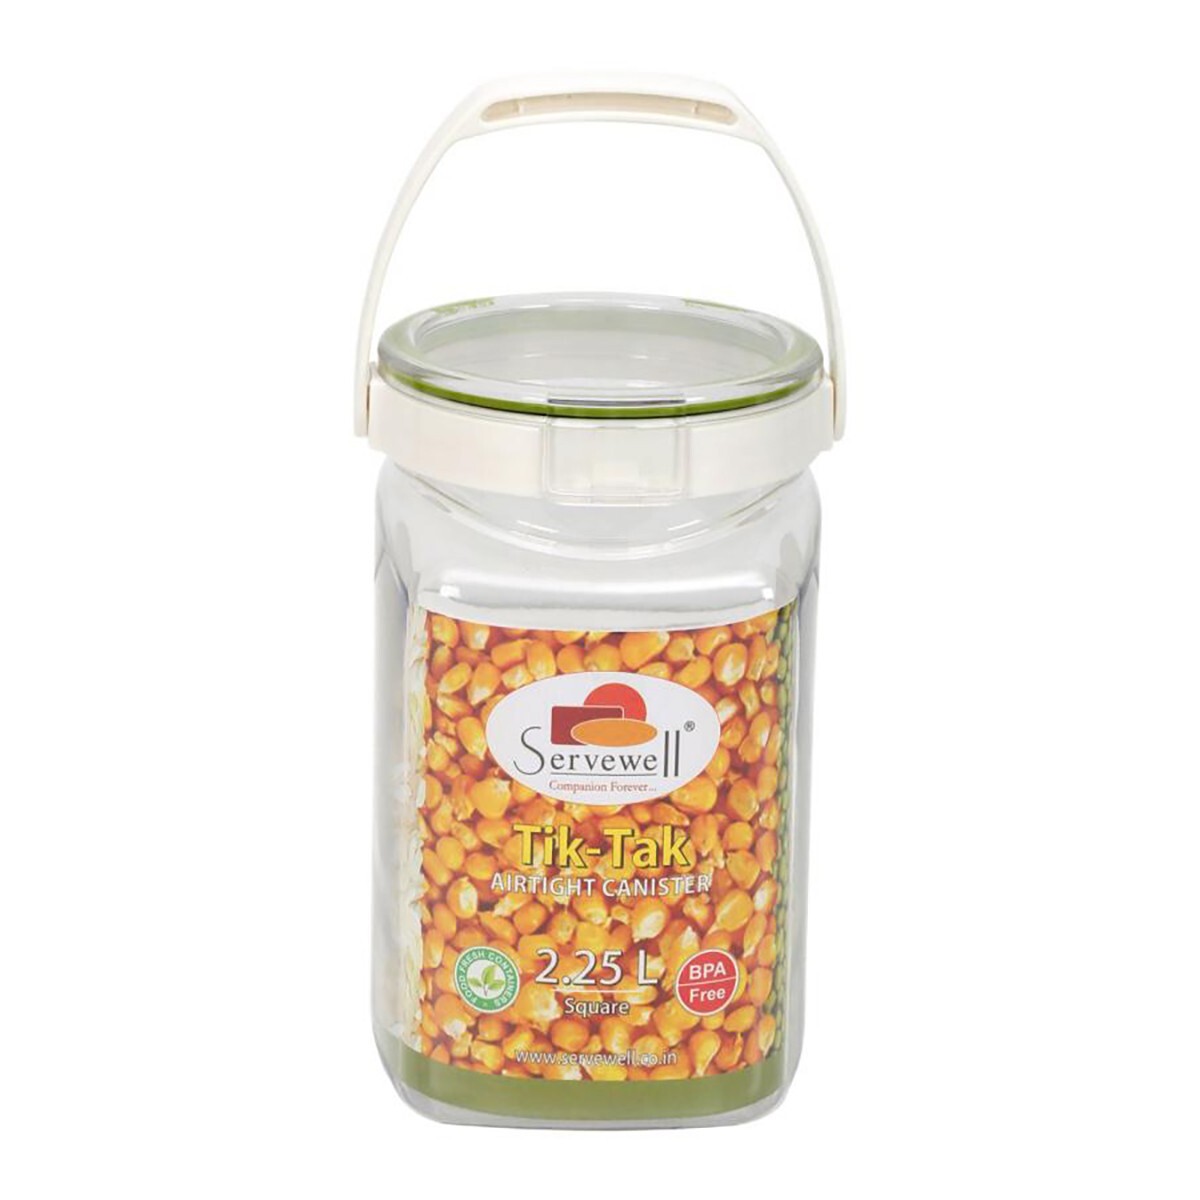 Servewell TT 106 Square Canister 2.25 L